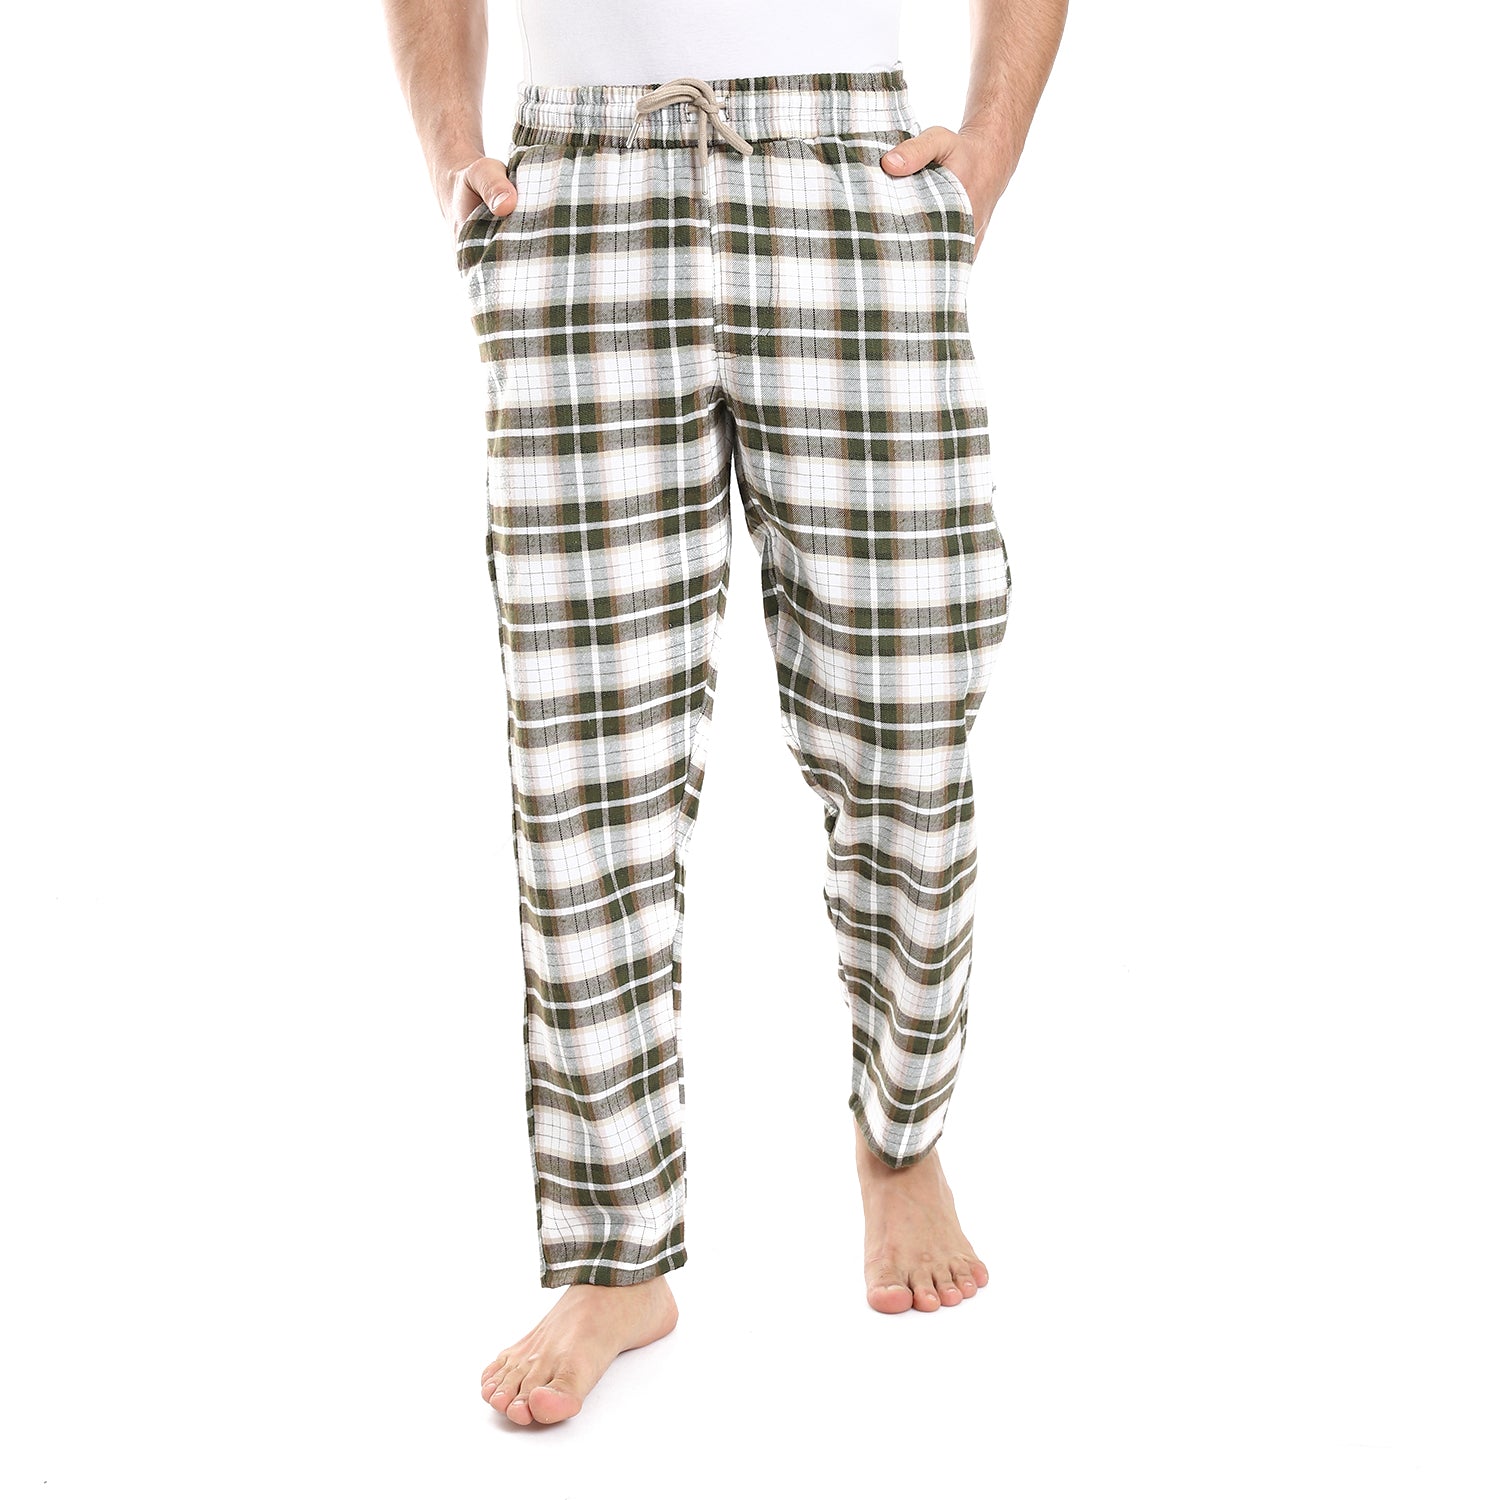 Offering 3 pieces of undershirt, pajamas, and checkered pants